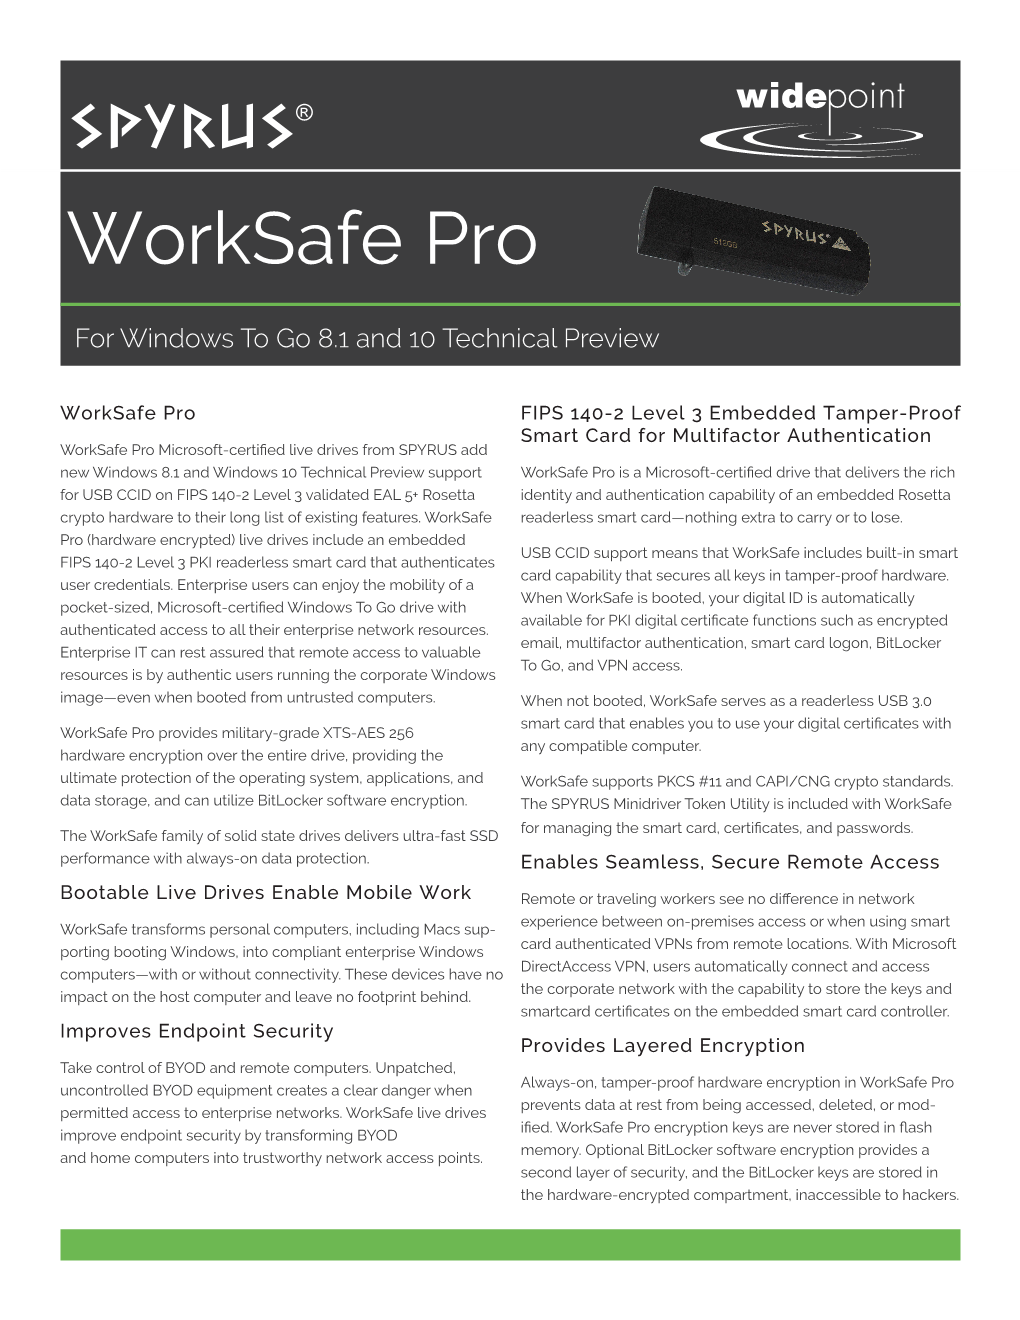 Sfeatures of SPYRUS Worksafe Pro Windows to Go Drives